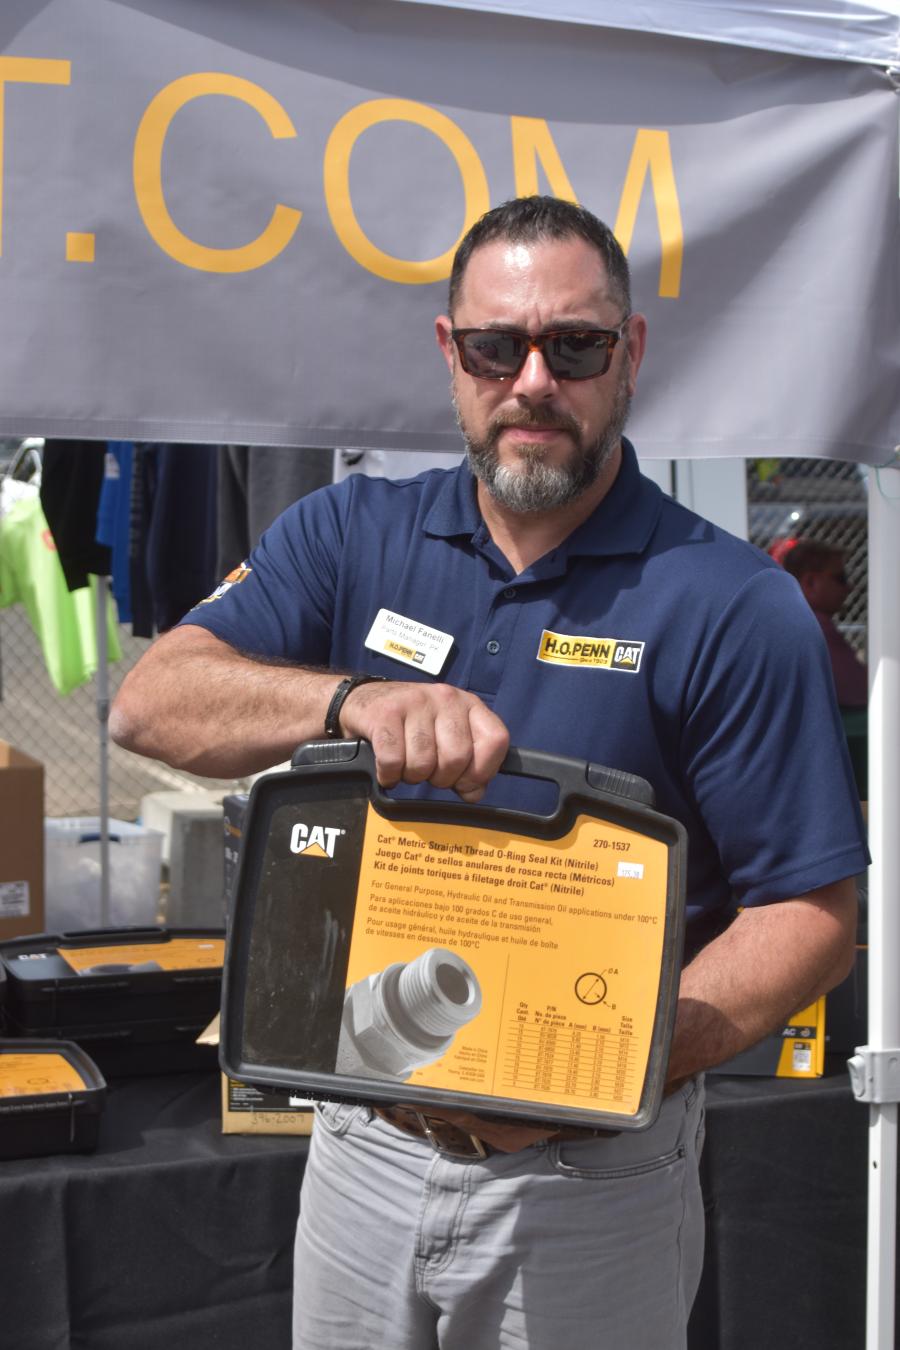 From the Cat merchandise exhibit, Michael Fanelli offers a Caterpillar O-ring kit.
(CEG photo) 